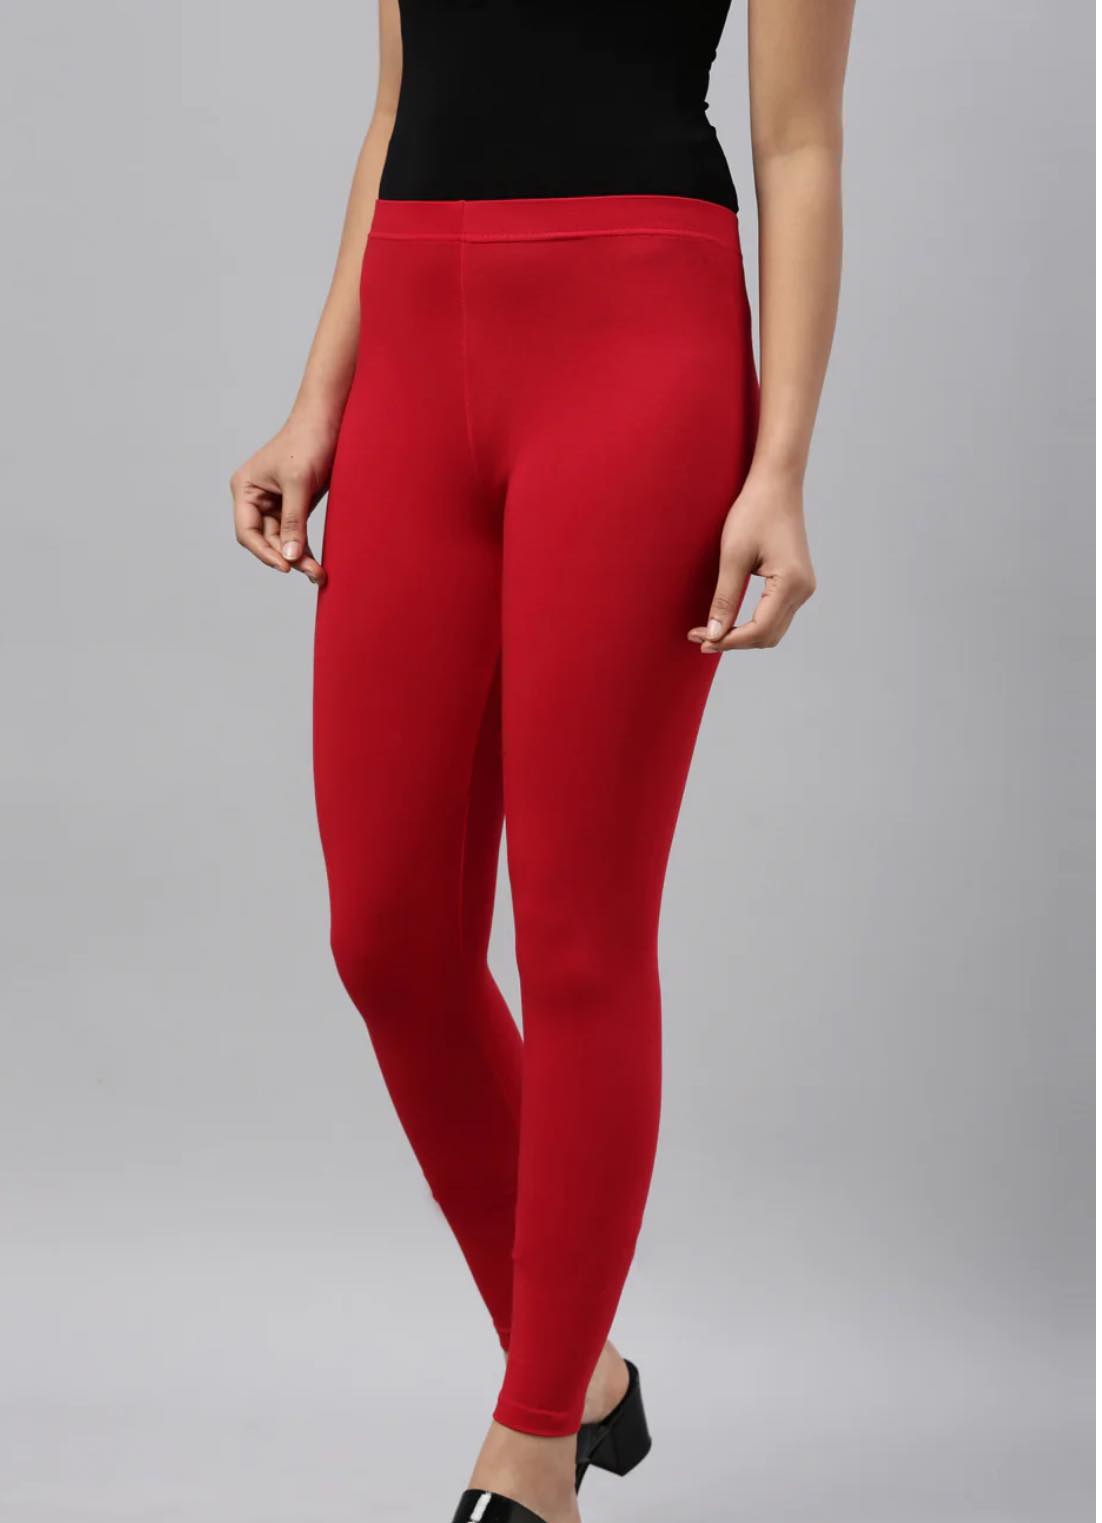 RED LEGGINGS FOR KIDS (SMALL TO 2XL )